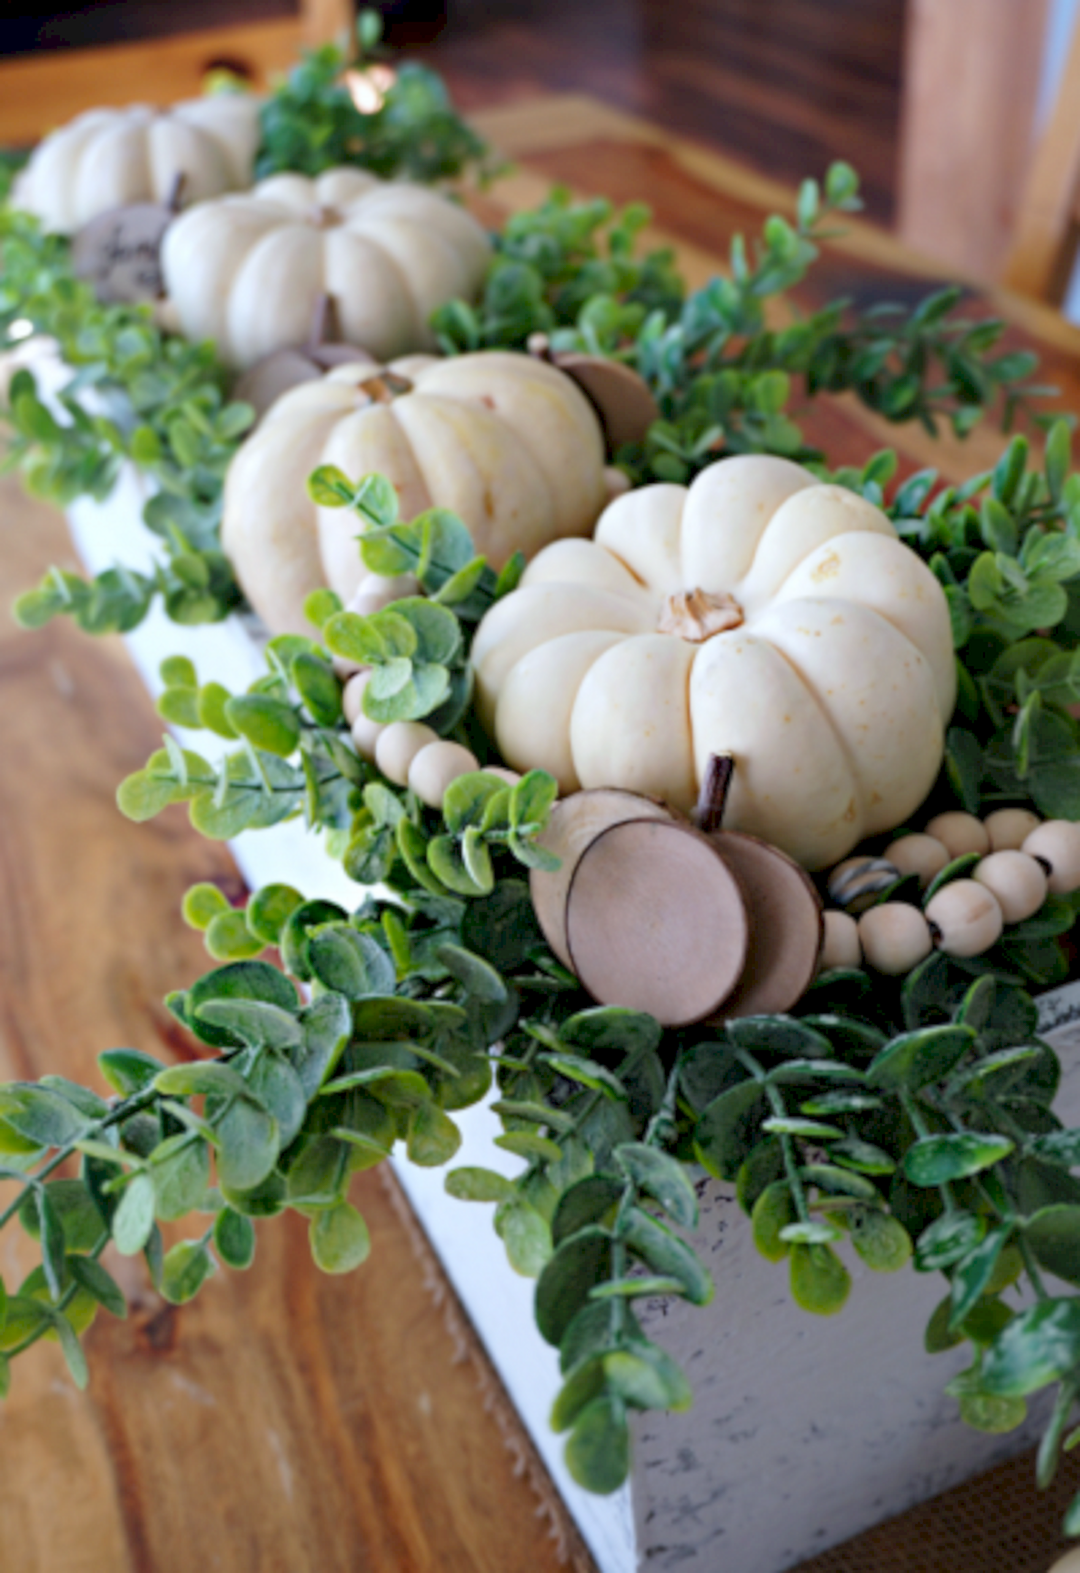 Mini Pumpkins And Eucalyptus from Countryliving